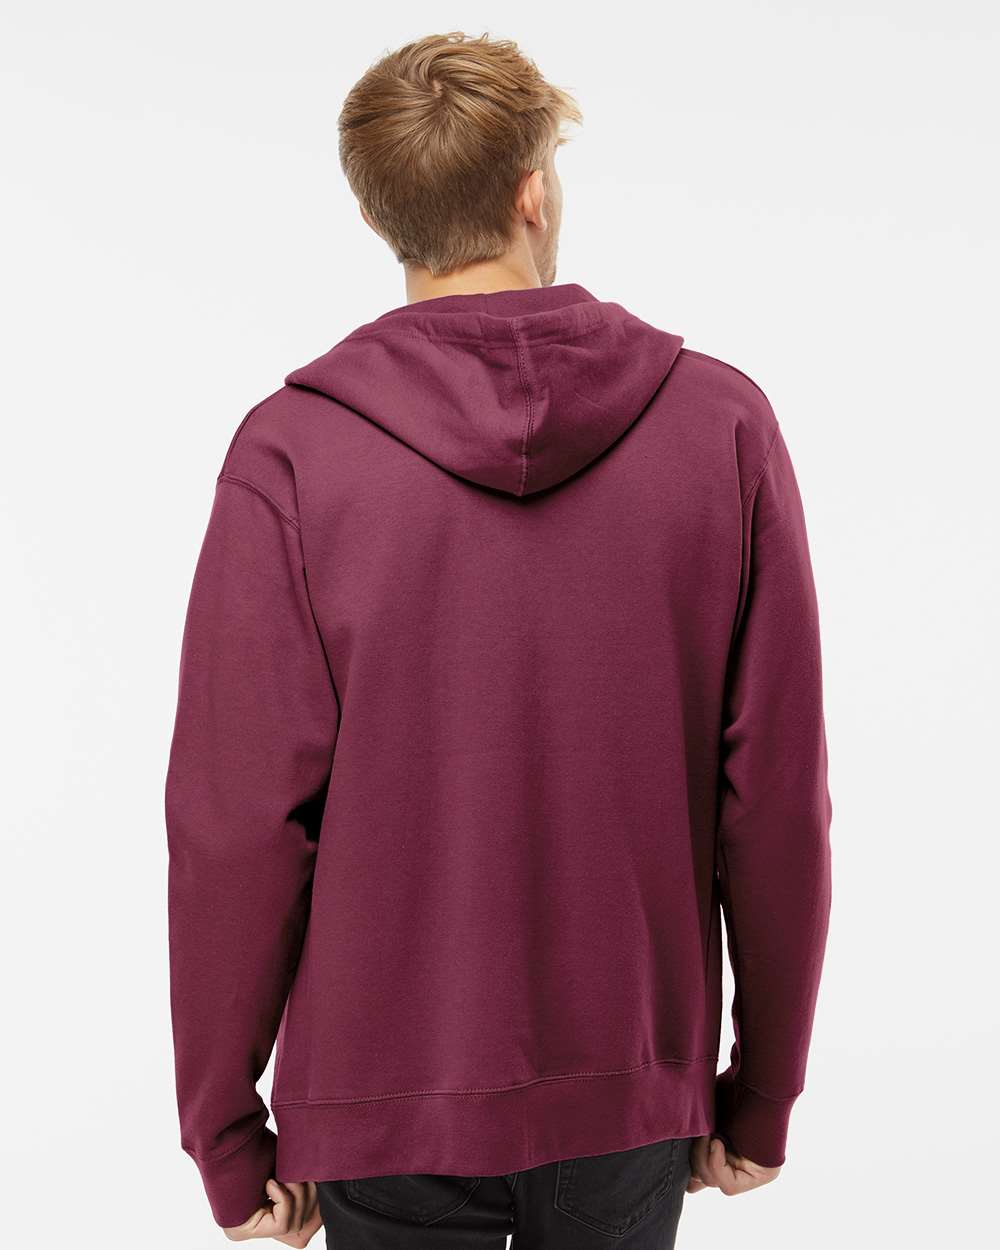 Independent Trading Co. Midweight Full-Zip Hooded Sweatshirt SS4500Z #colormdl_Maroon